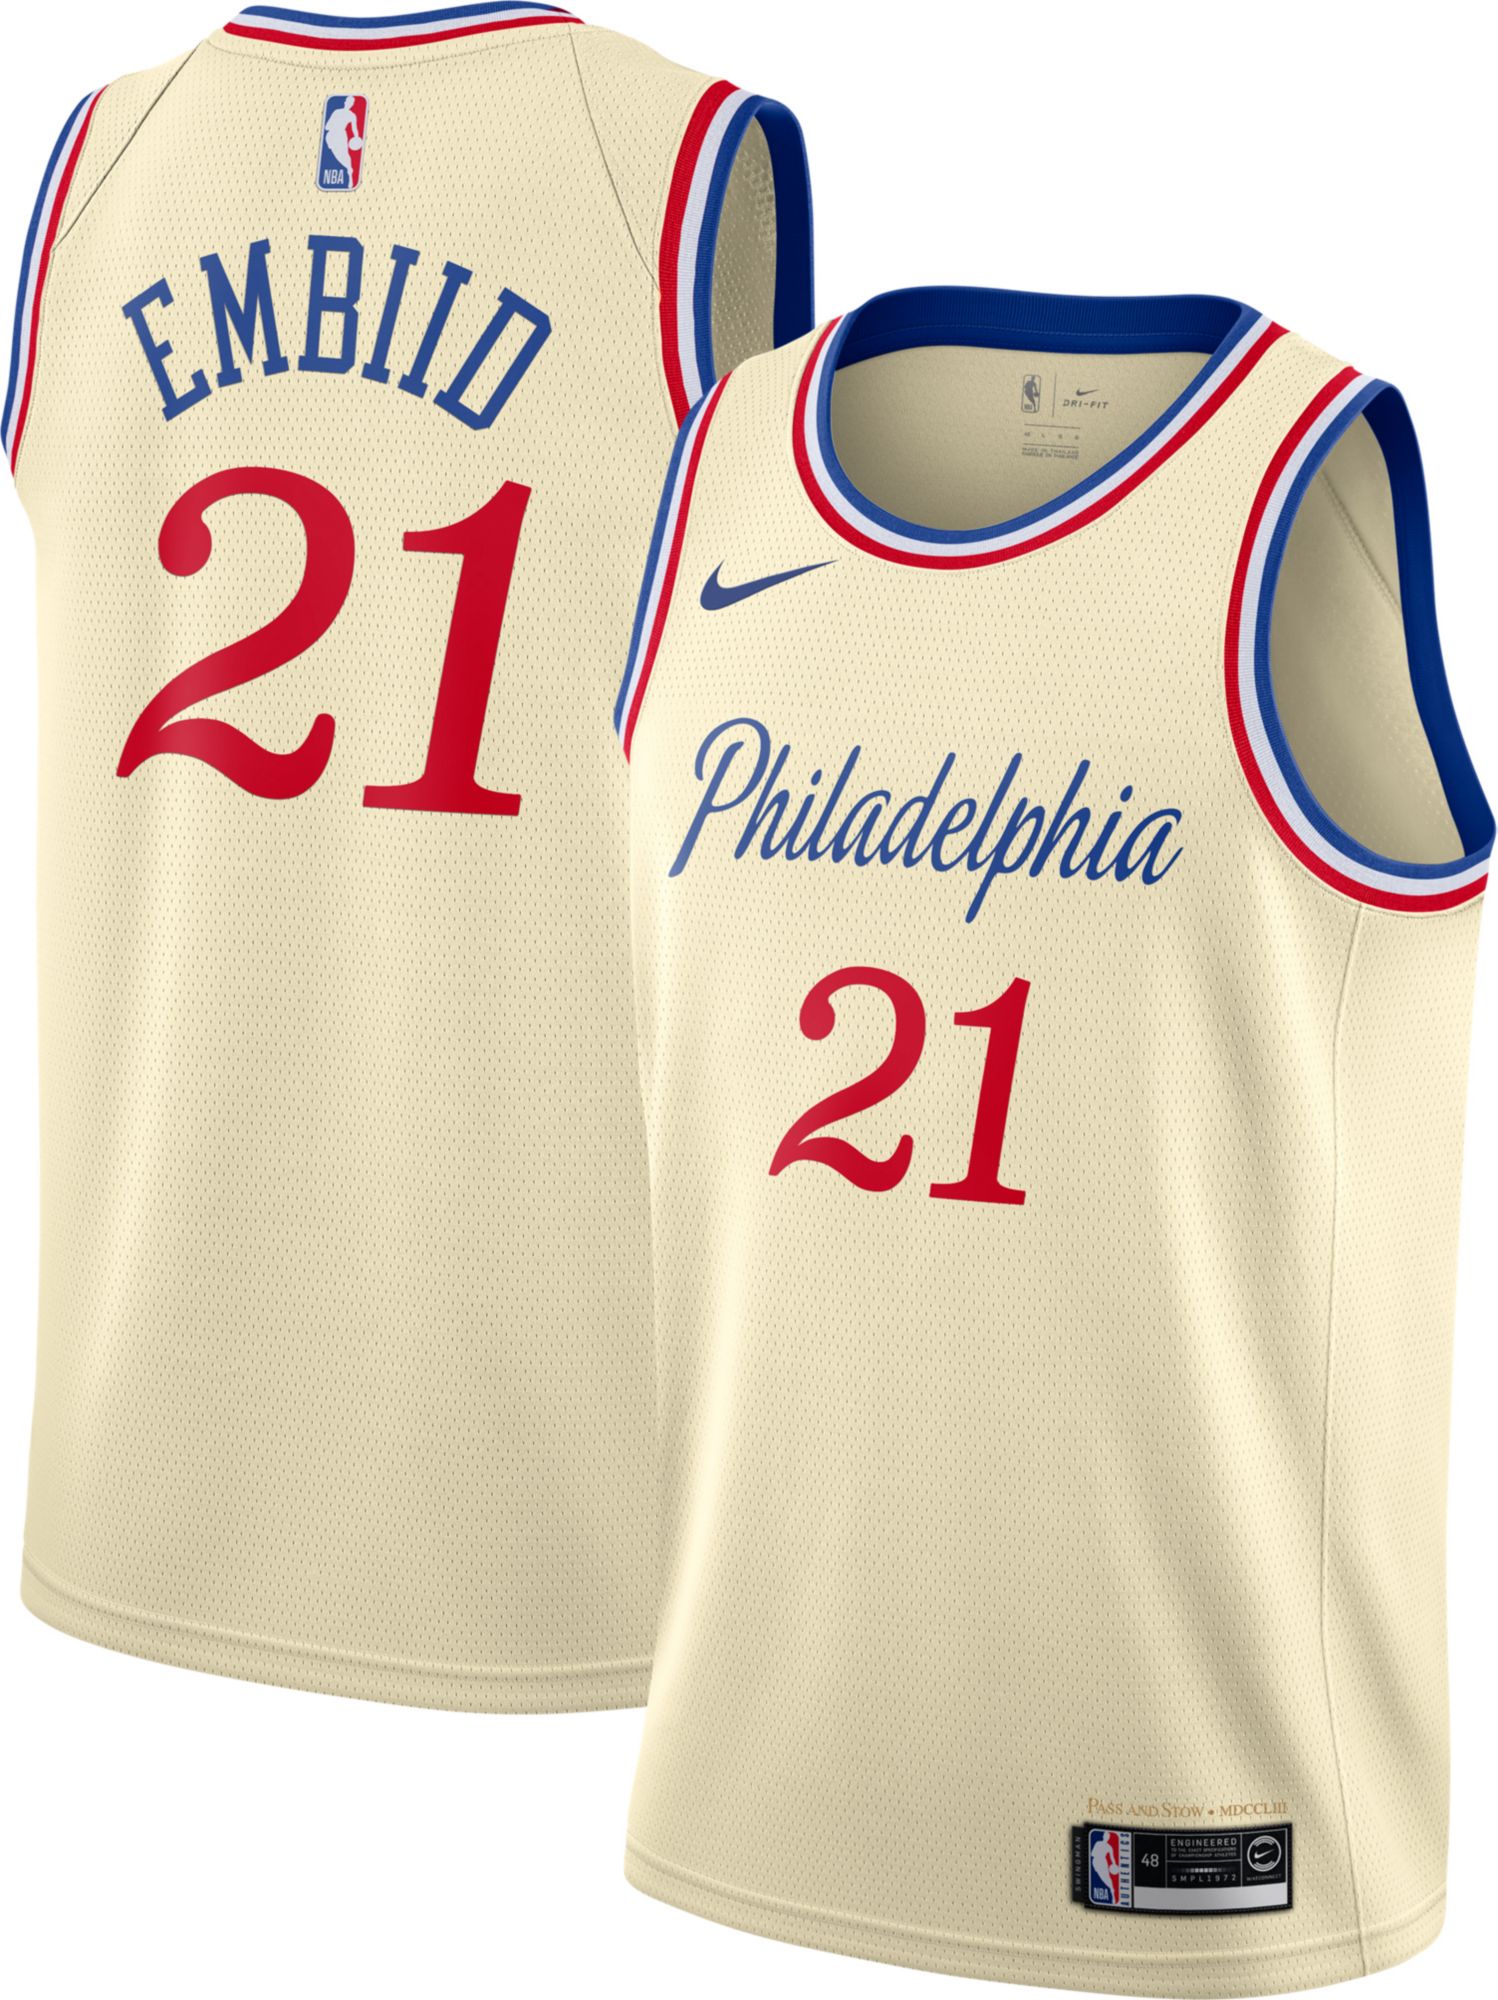 sixers off white jersey